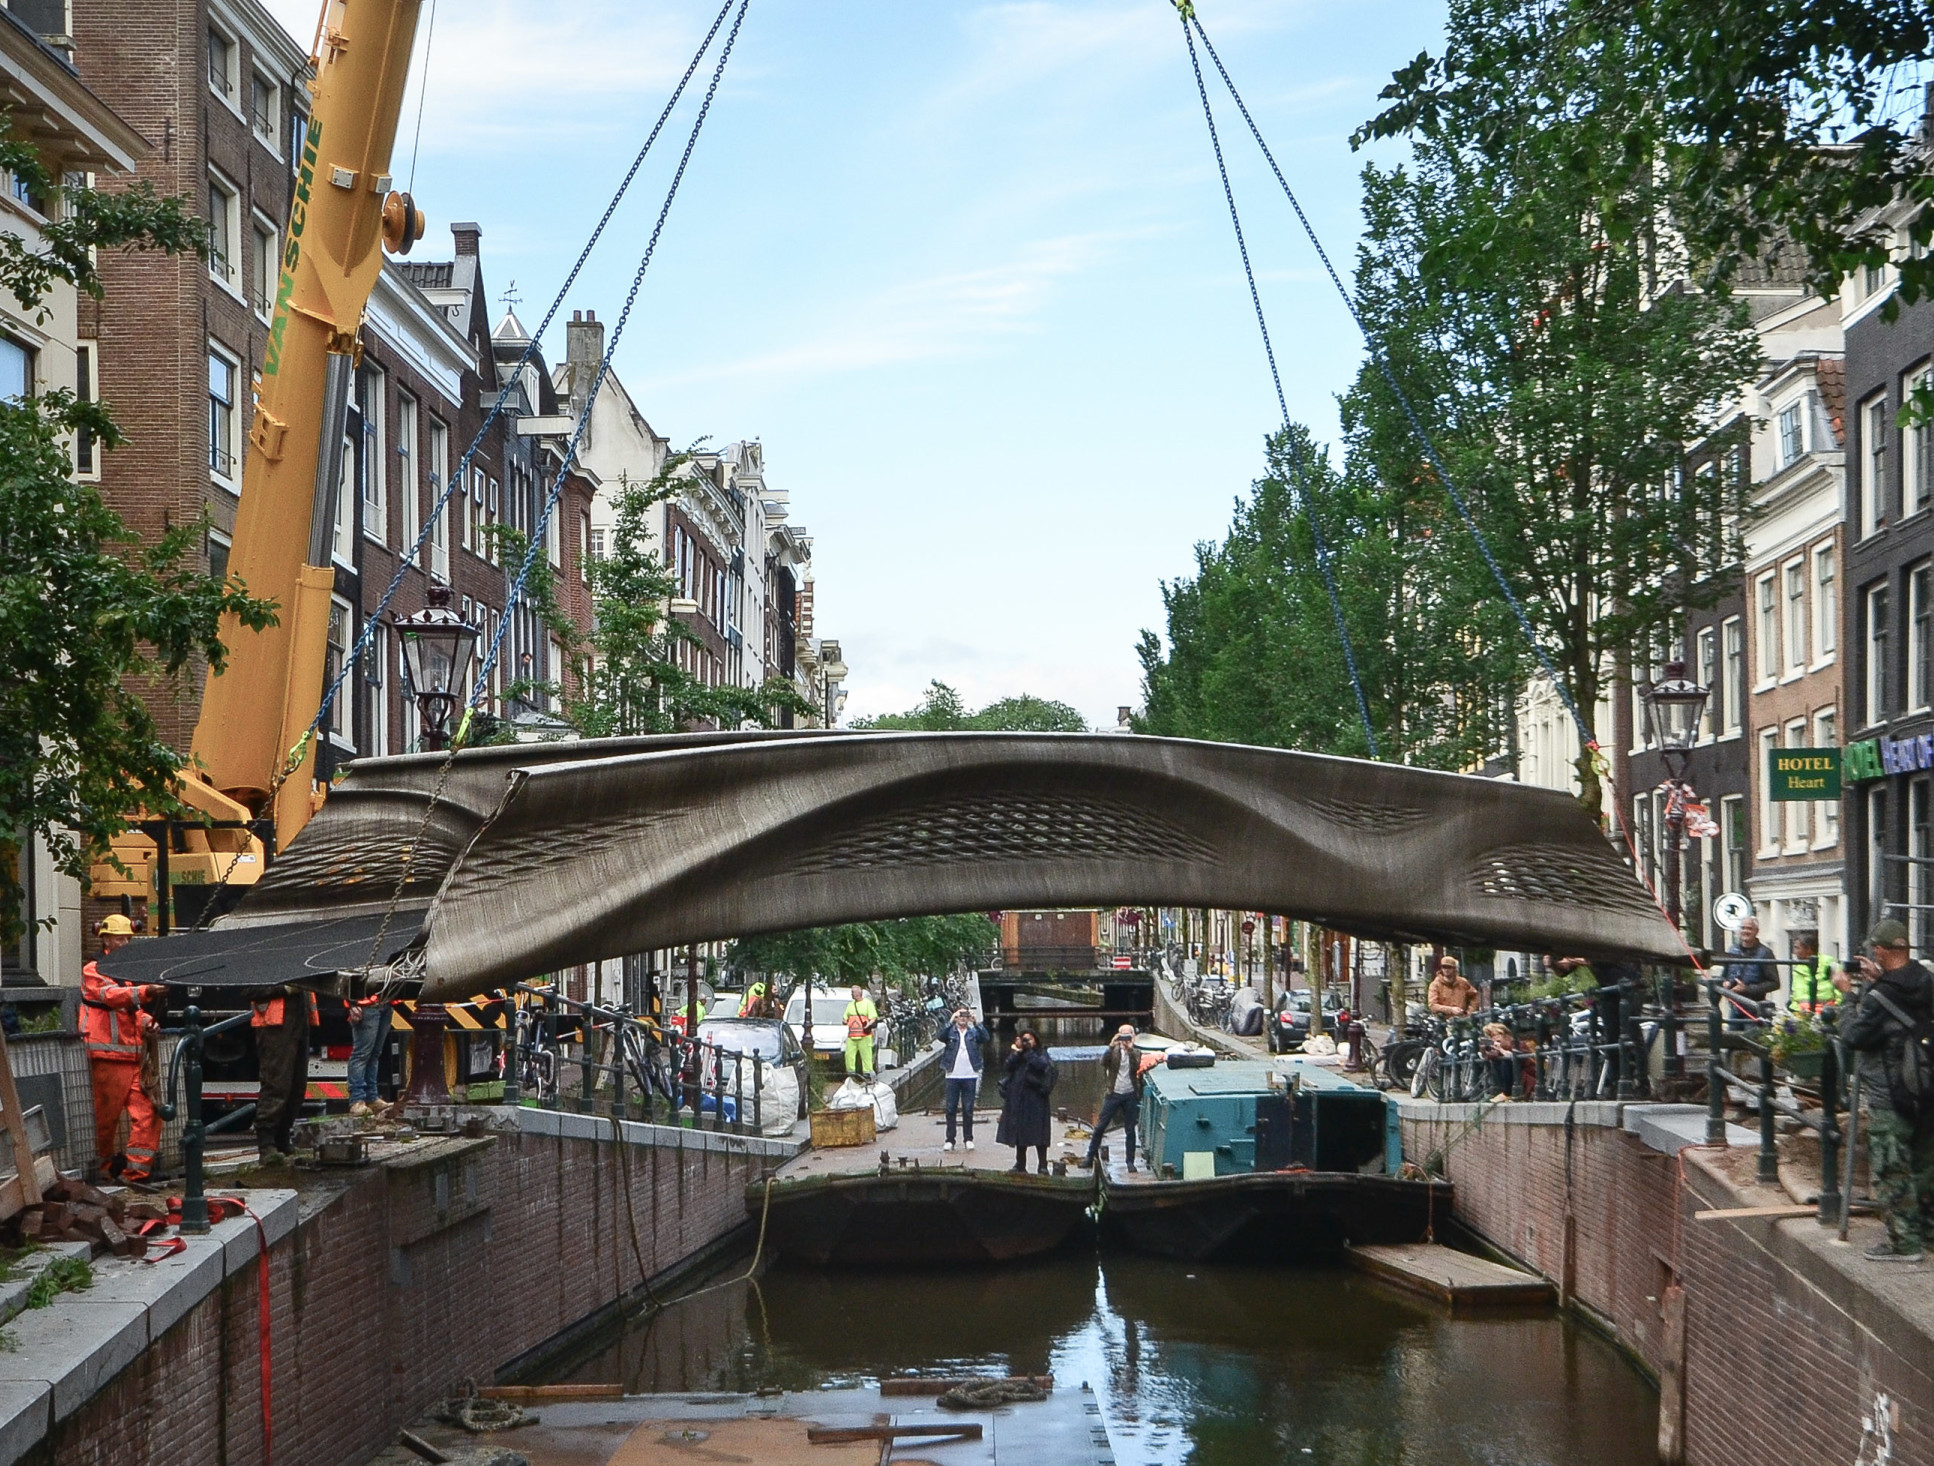 Bridge being lowered across canal